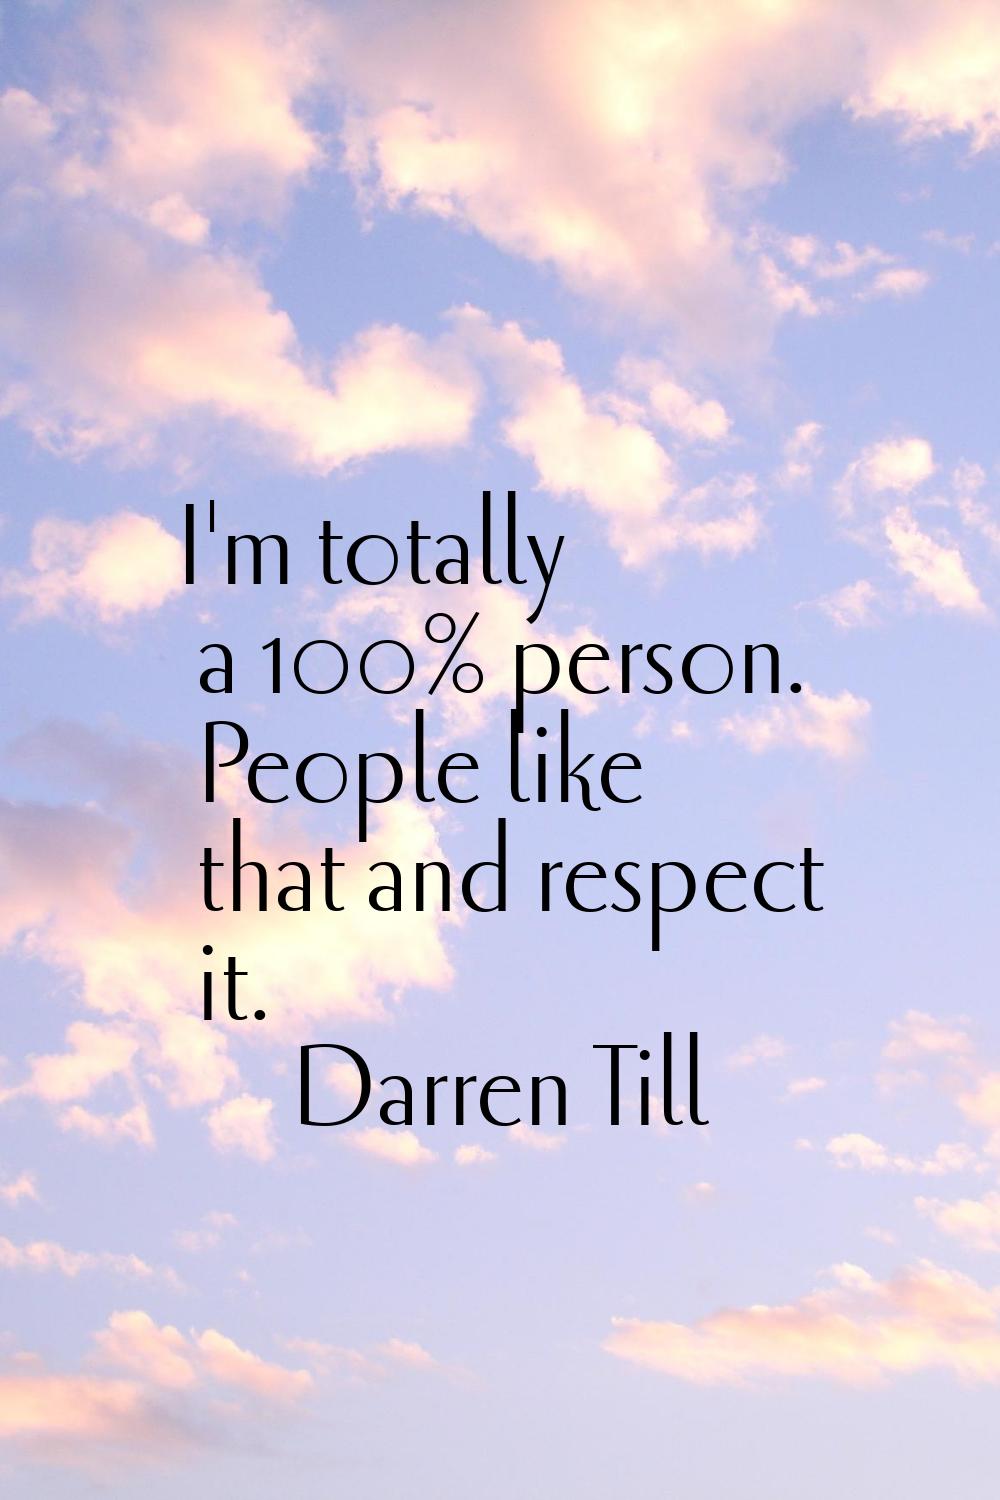 I'm totally a 100% person. People like that and respect it.